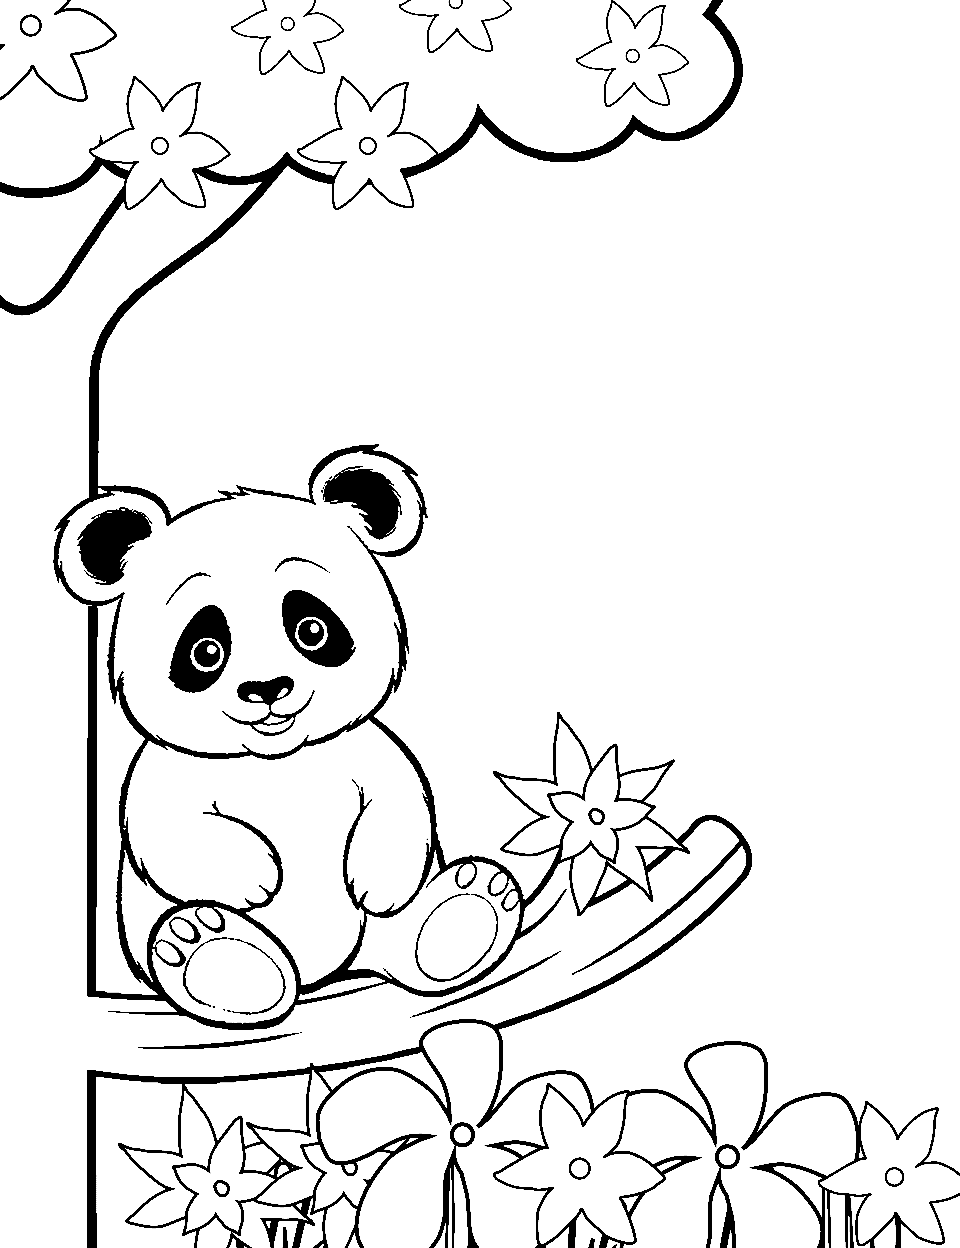 Young Panda and Spring Blossoms Coloring Page - A young panda enjoying the view sitting on a tree of spring blossoms.